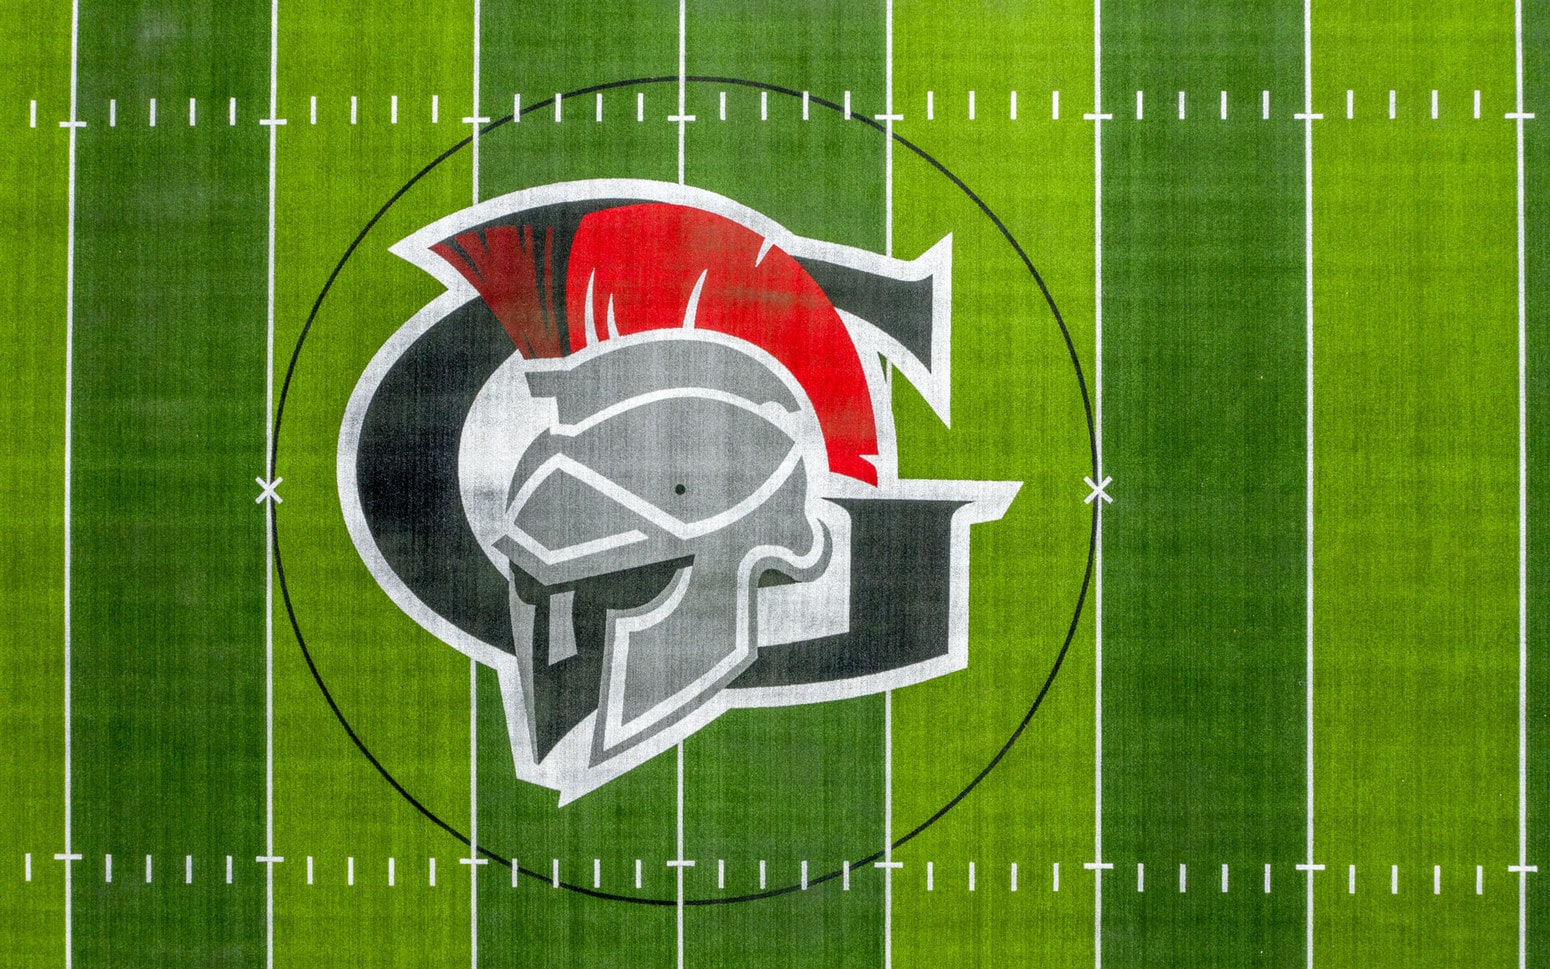 Gladstone logo on the synthetic field